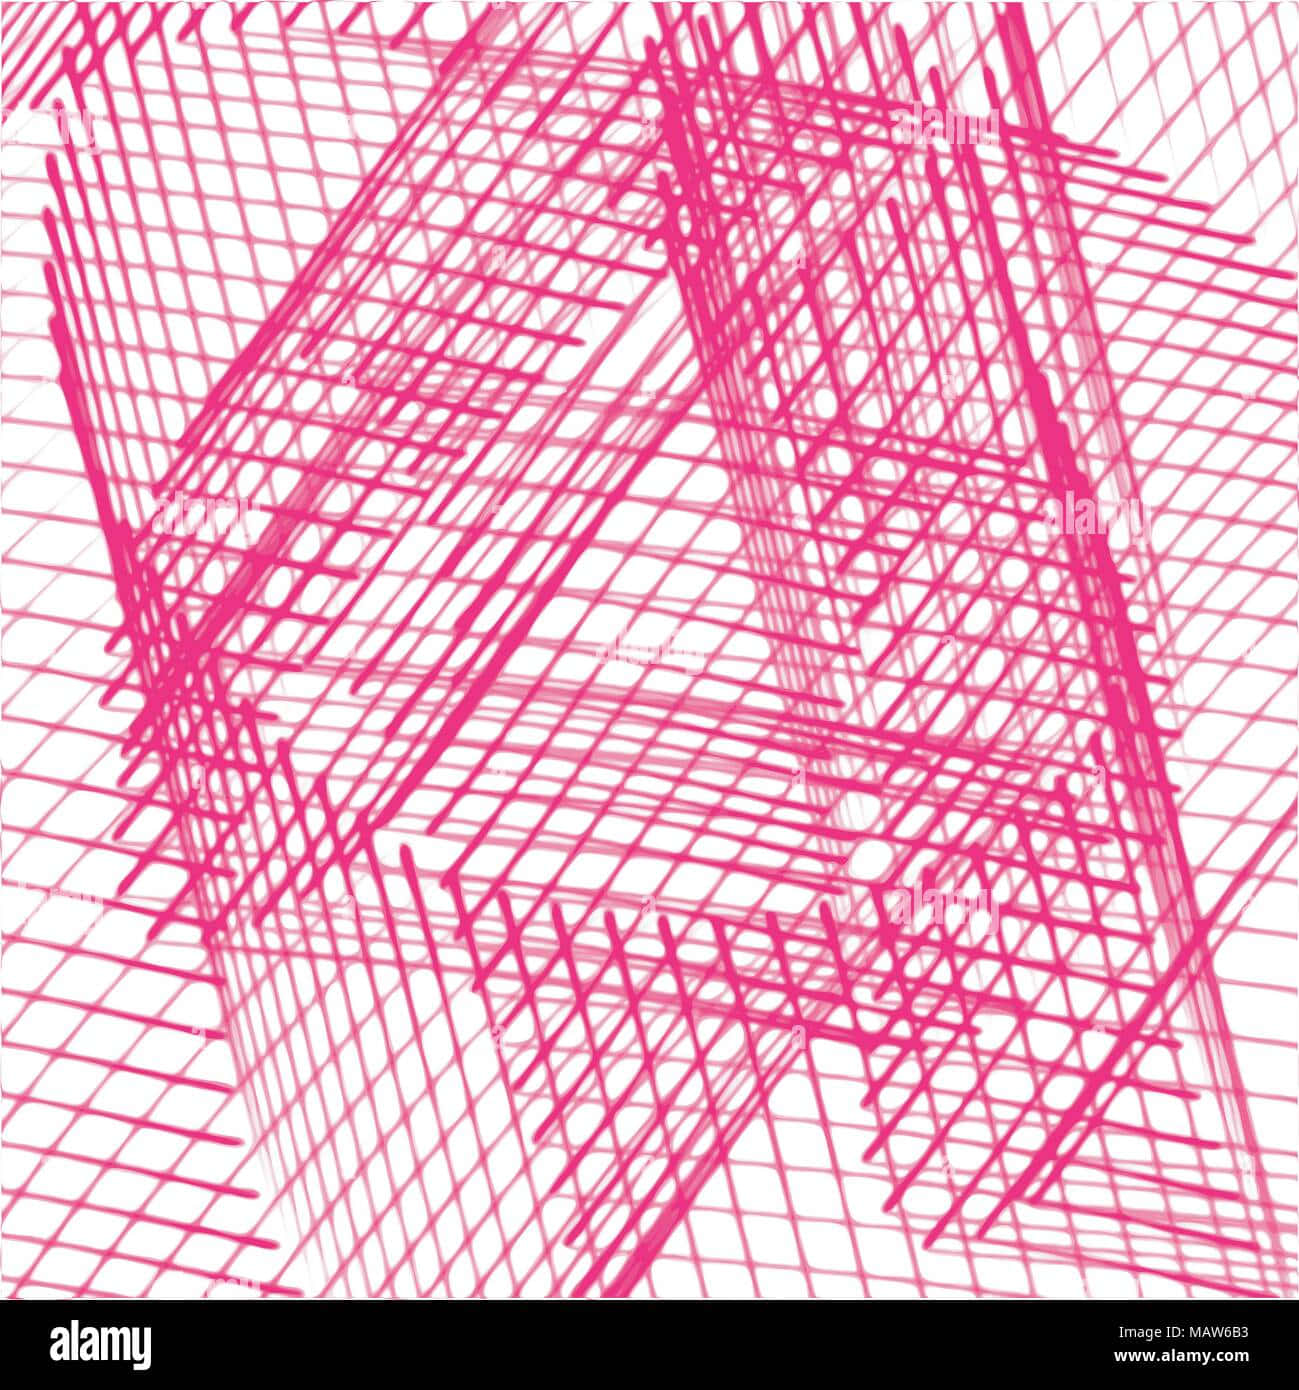 “Explore the Possibilities of a Bold Pink Grid” Wallpaper